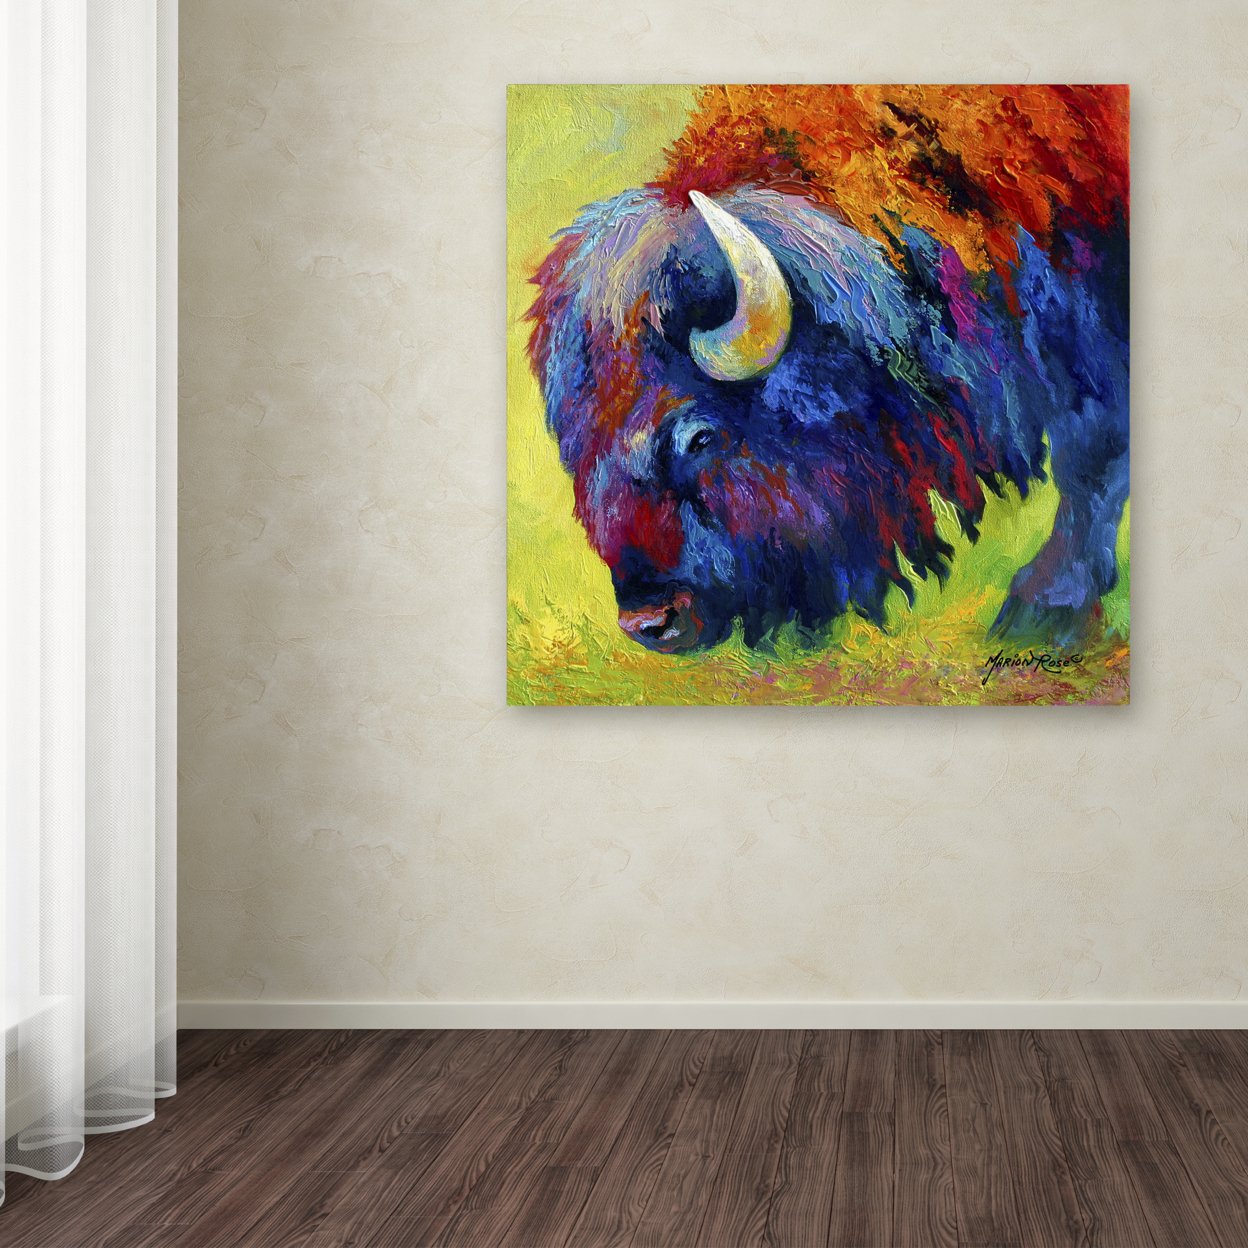 Marion Rose 'Bison Portrait II' Ready To Hang Canvas Art 18 X 18 Inches Made In USA